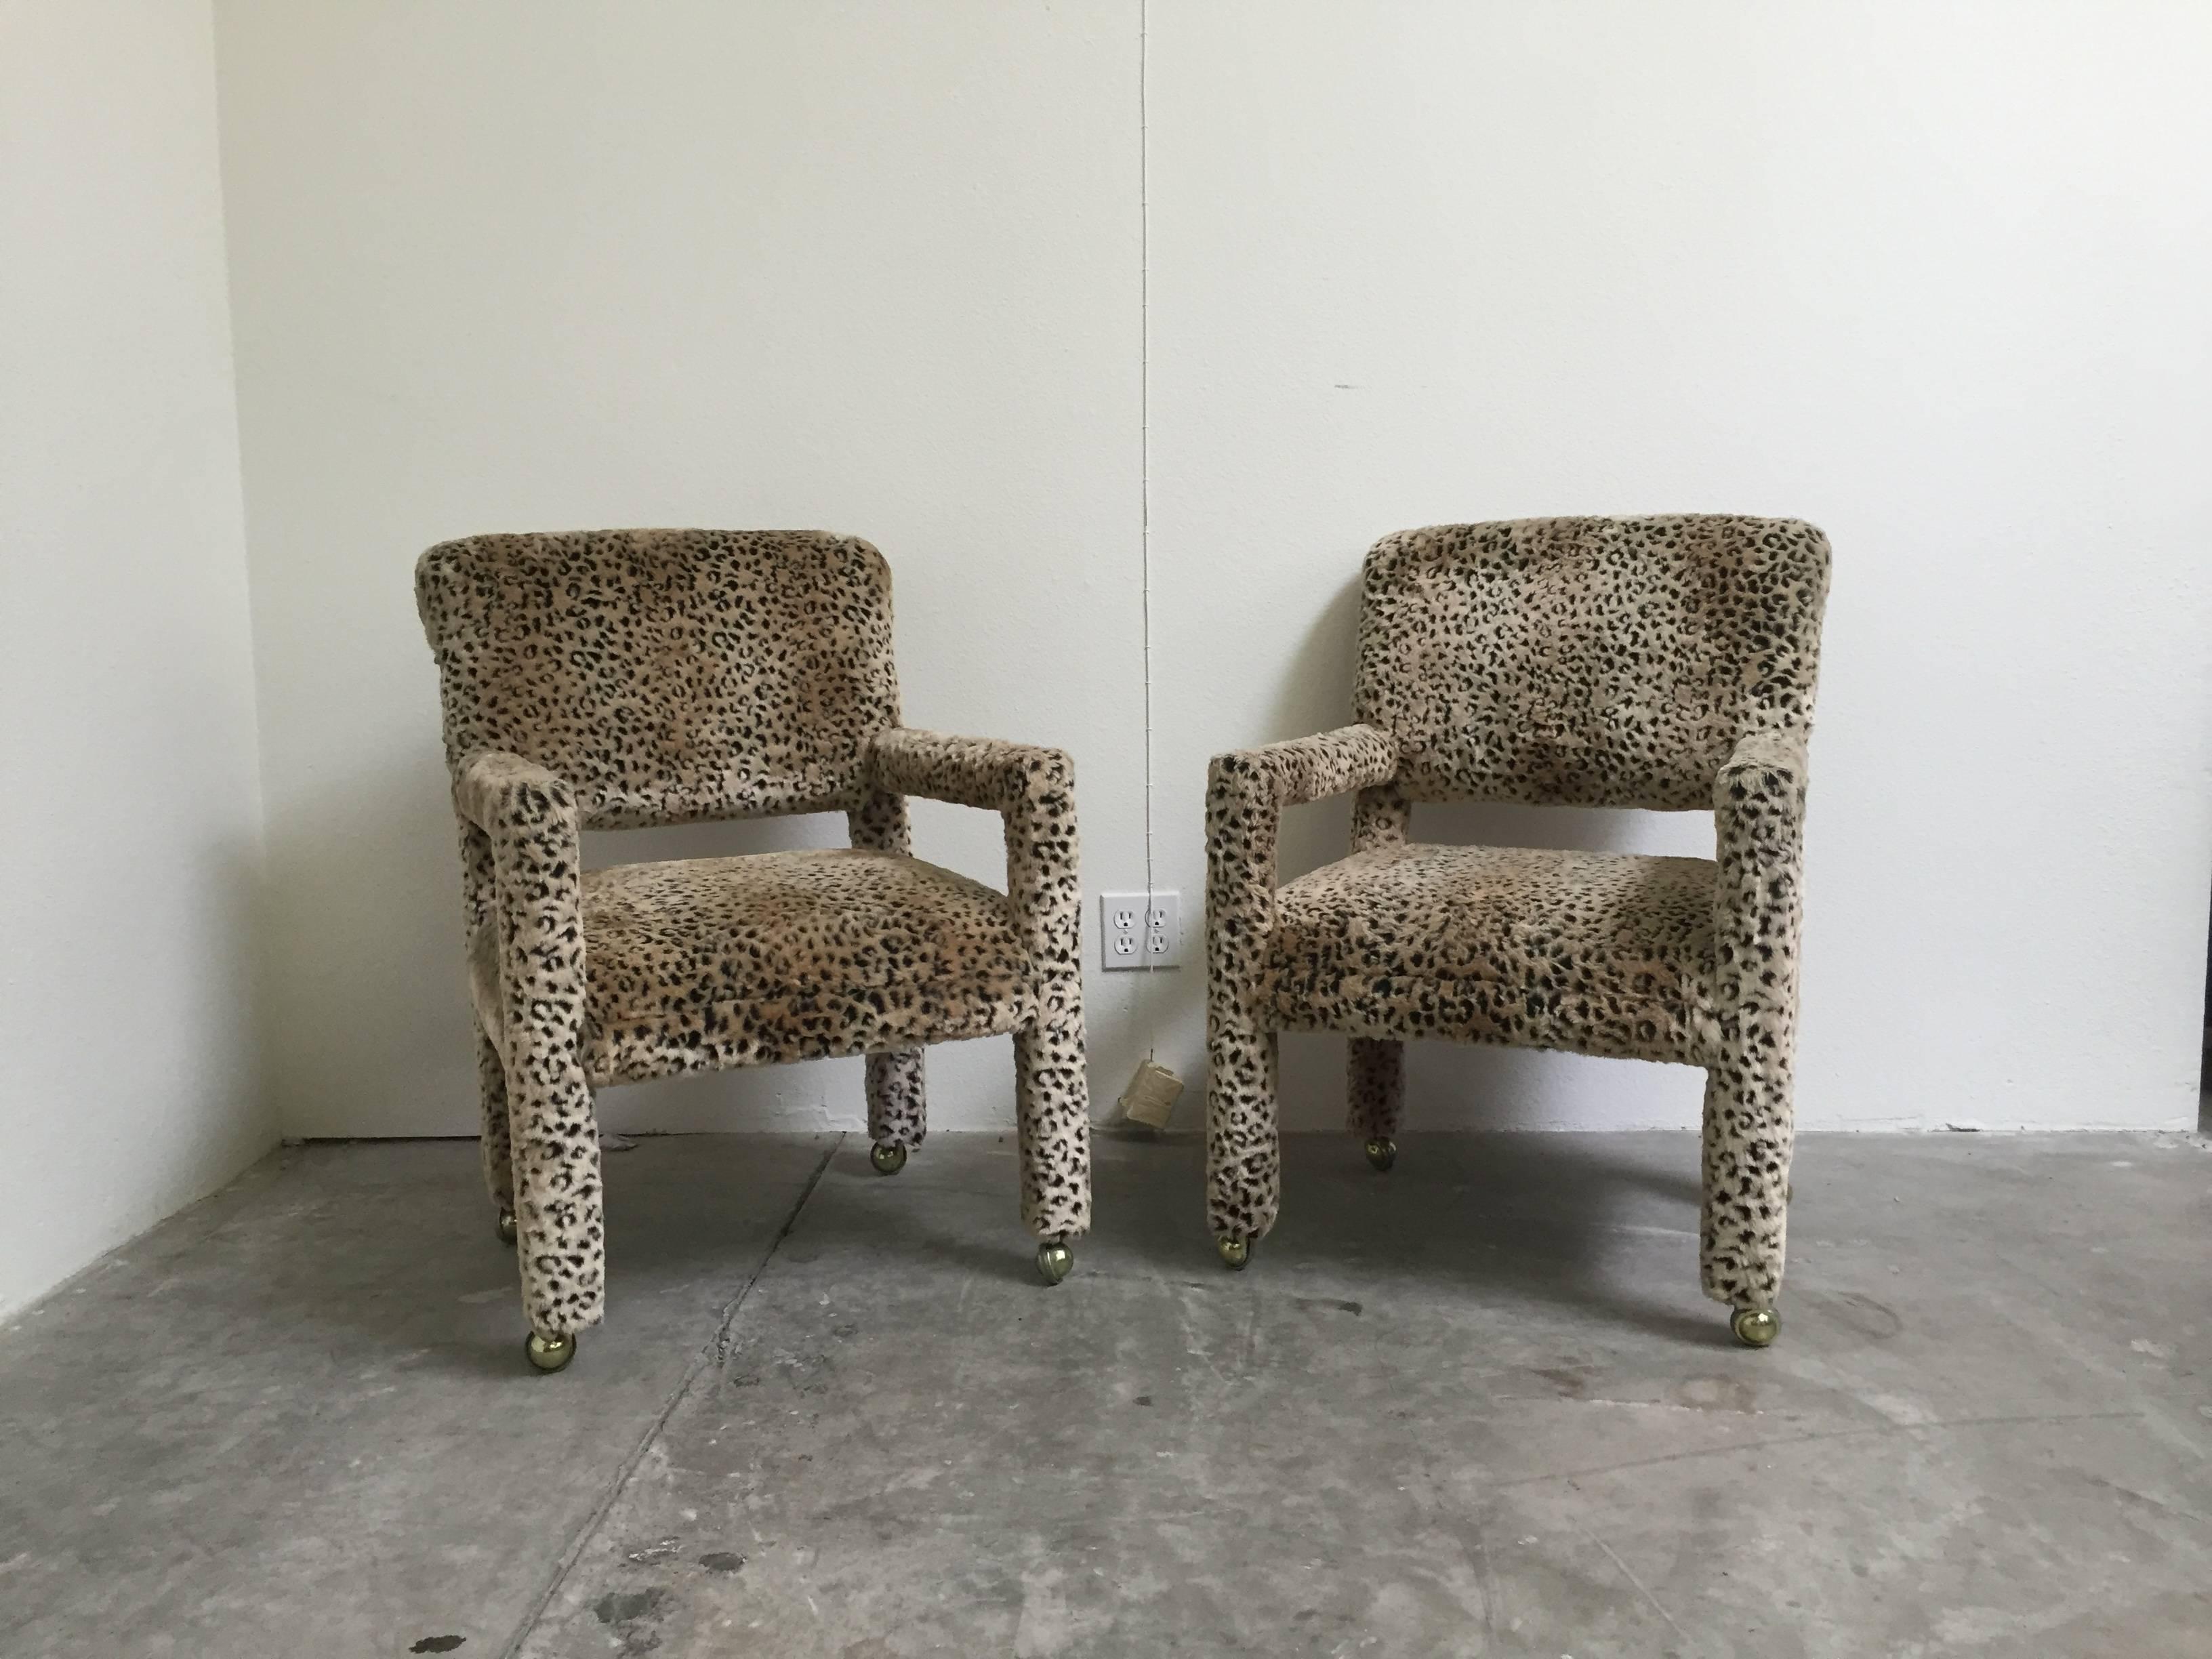 Pair of 1970s Leopard Parson chairs in the style of Milo Baughman. On gold casters with rolled backs. These statement pieces would work as occasional chairs, dining chairs, side chairs or desk chairs. All original material in outstanding vintage